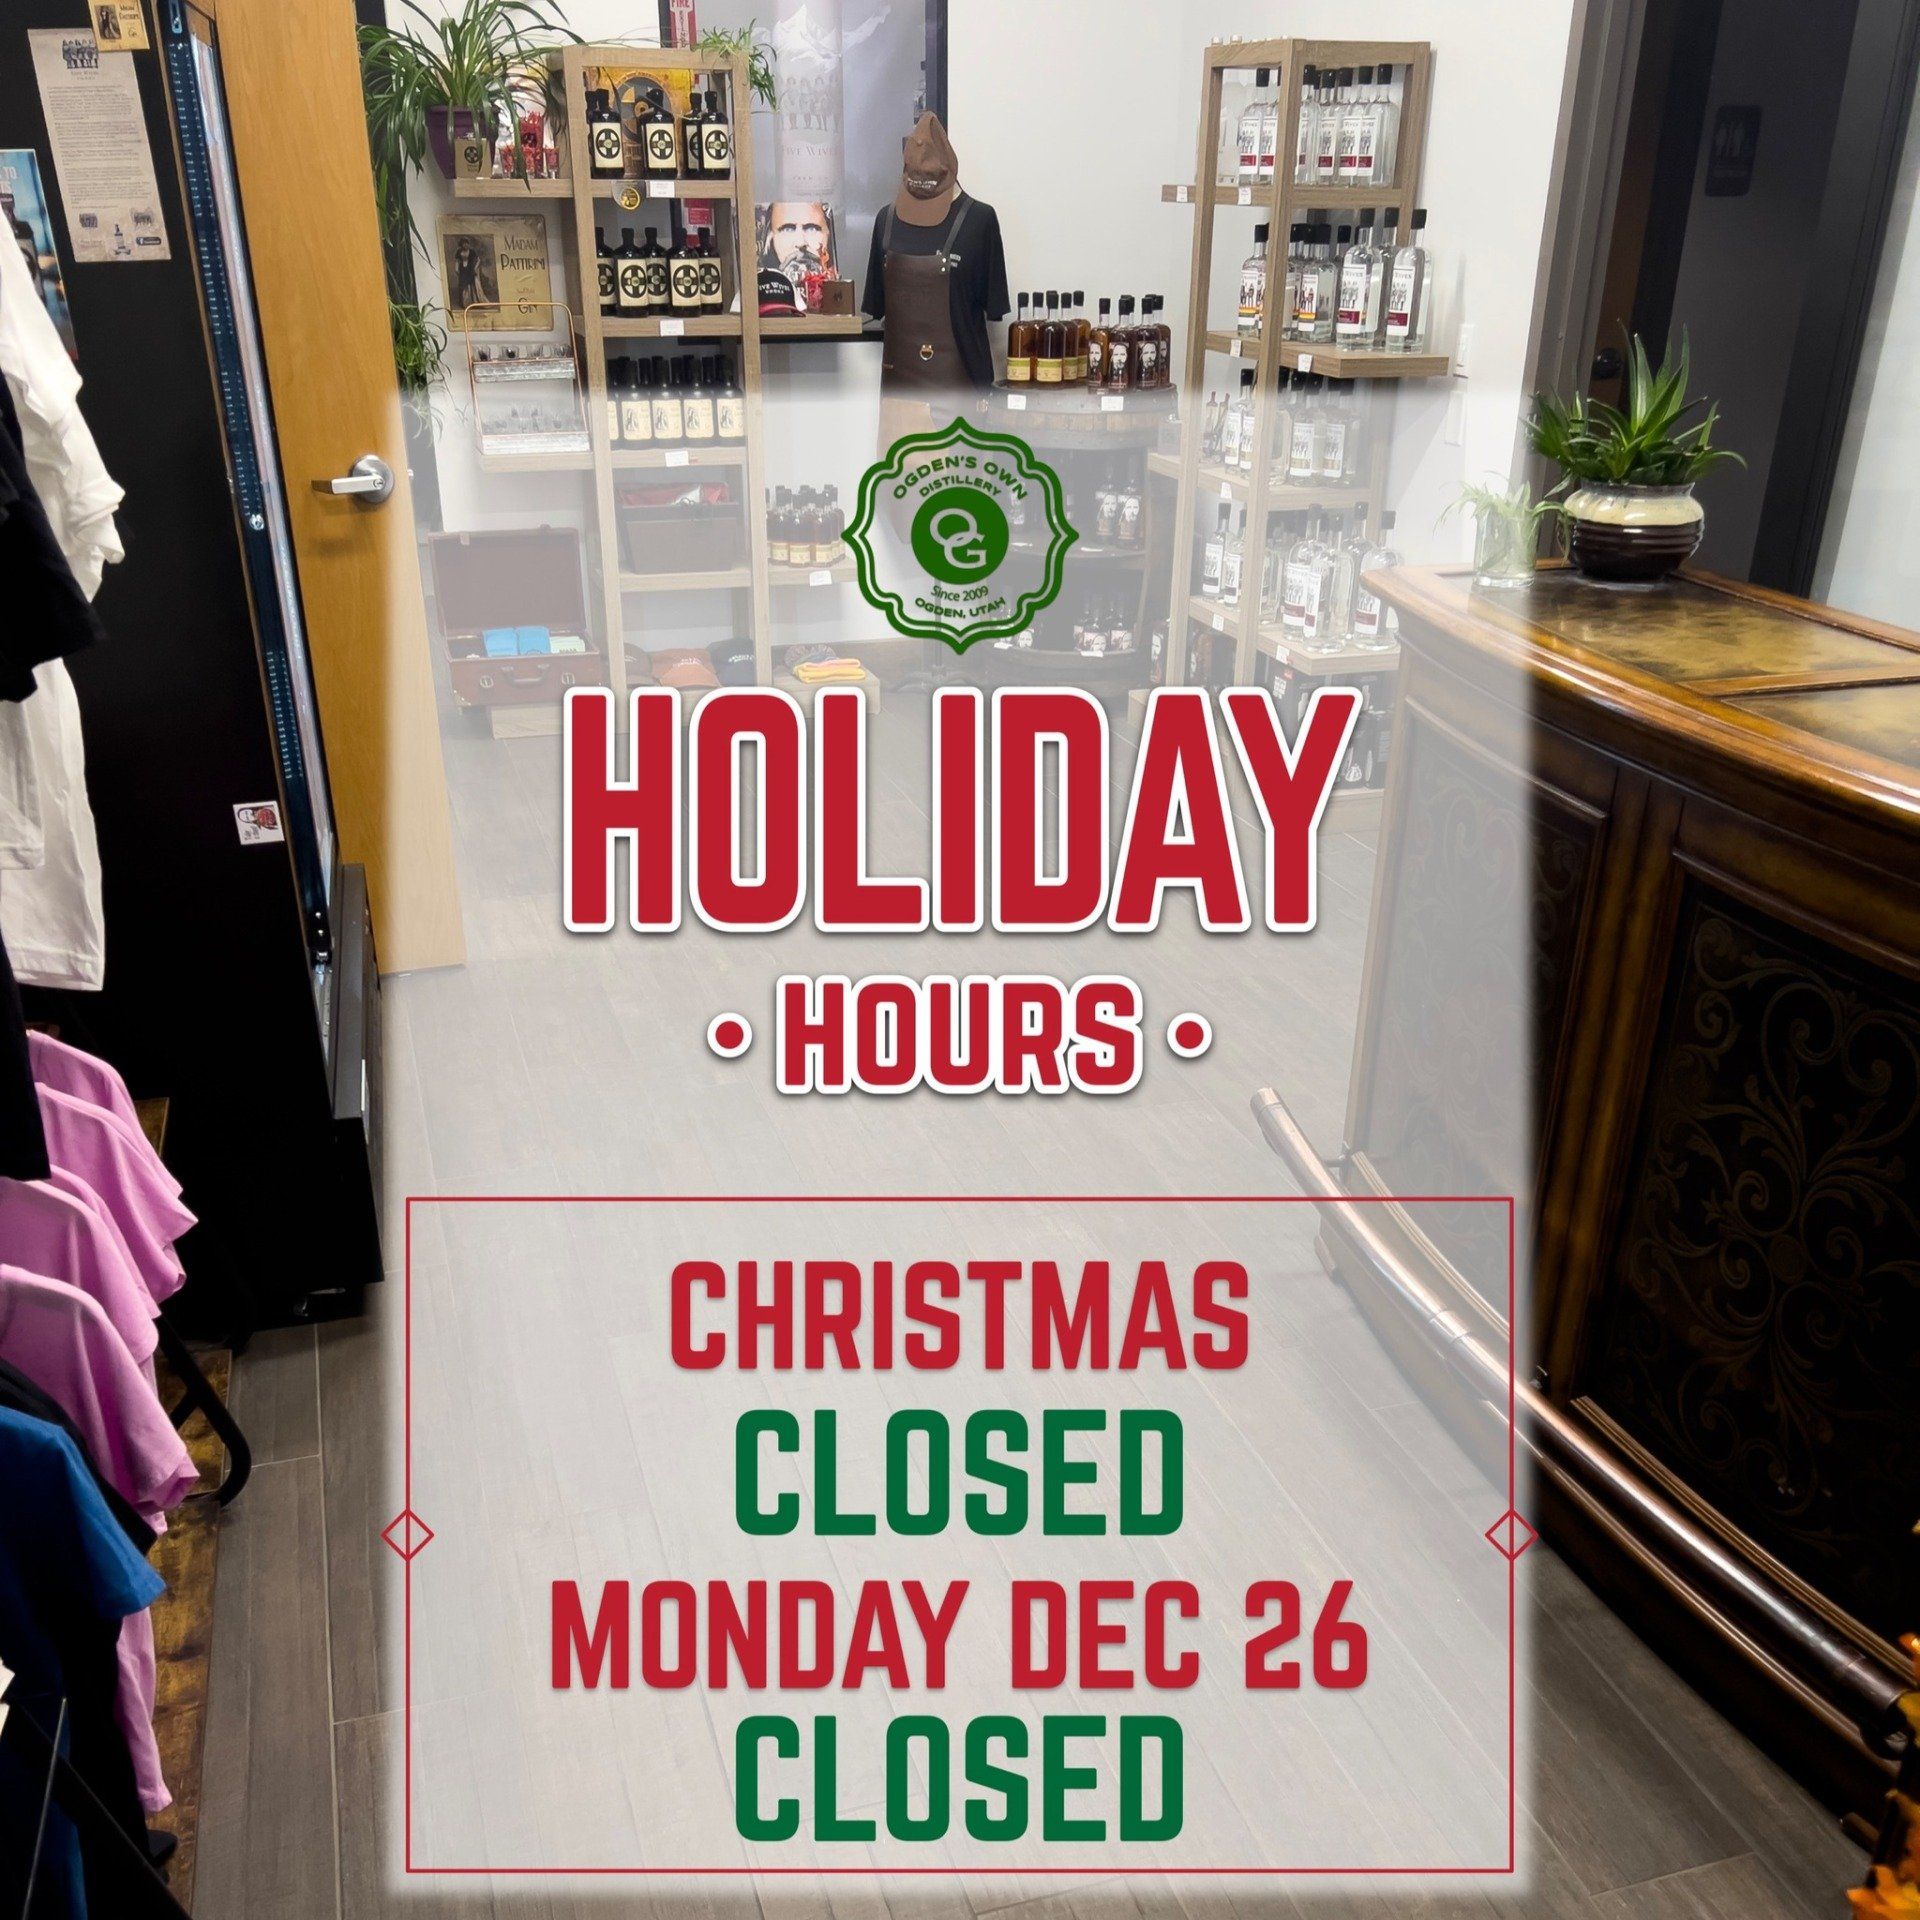 Ogden's Own Holiday Hours